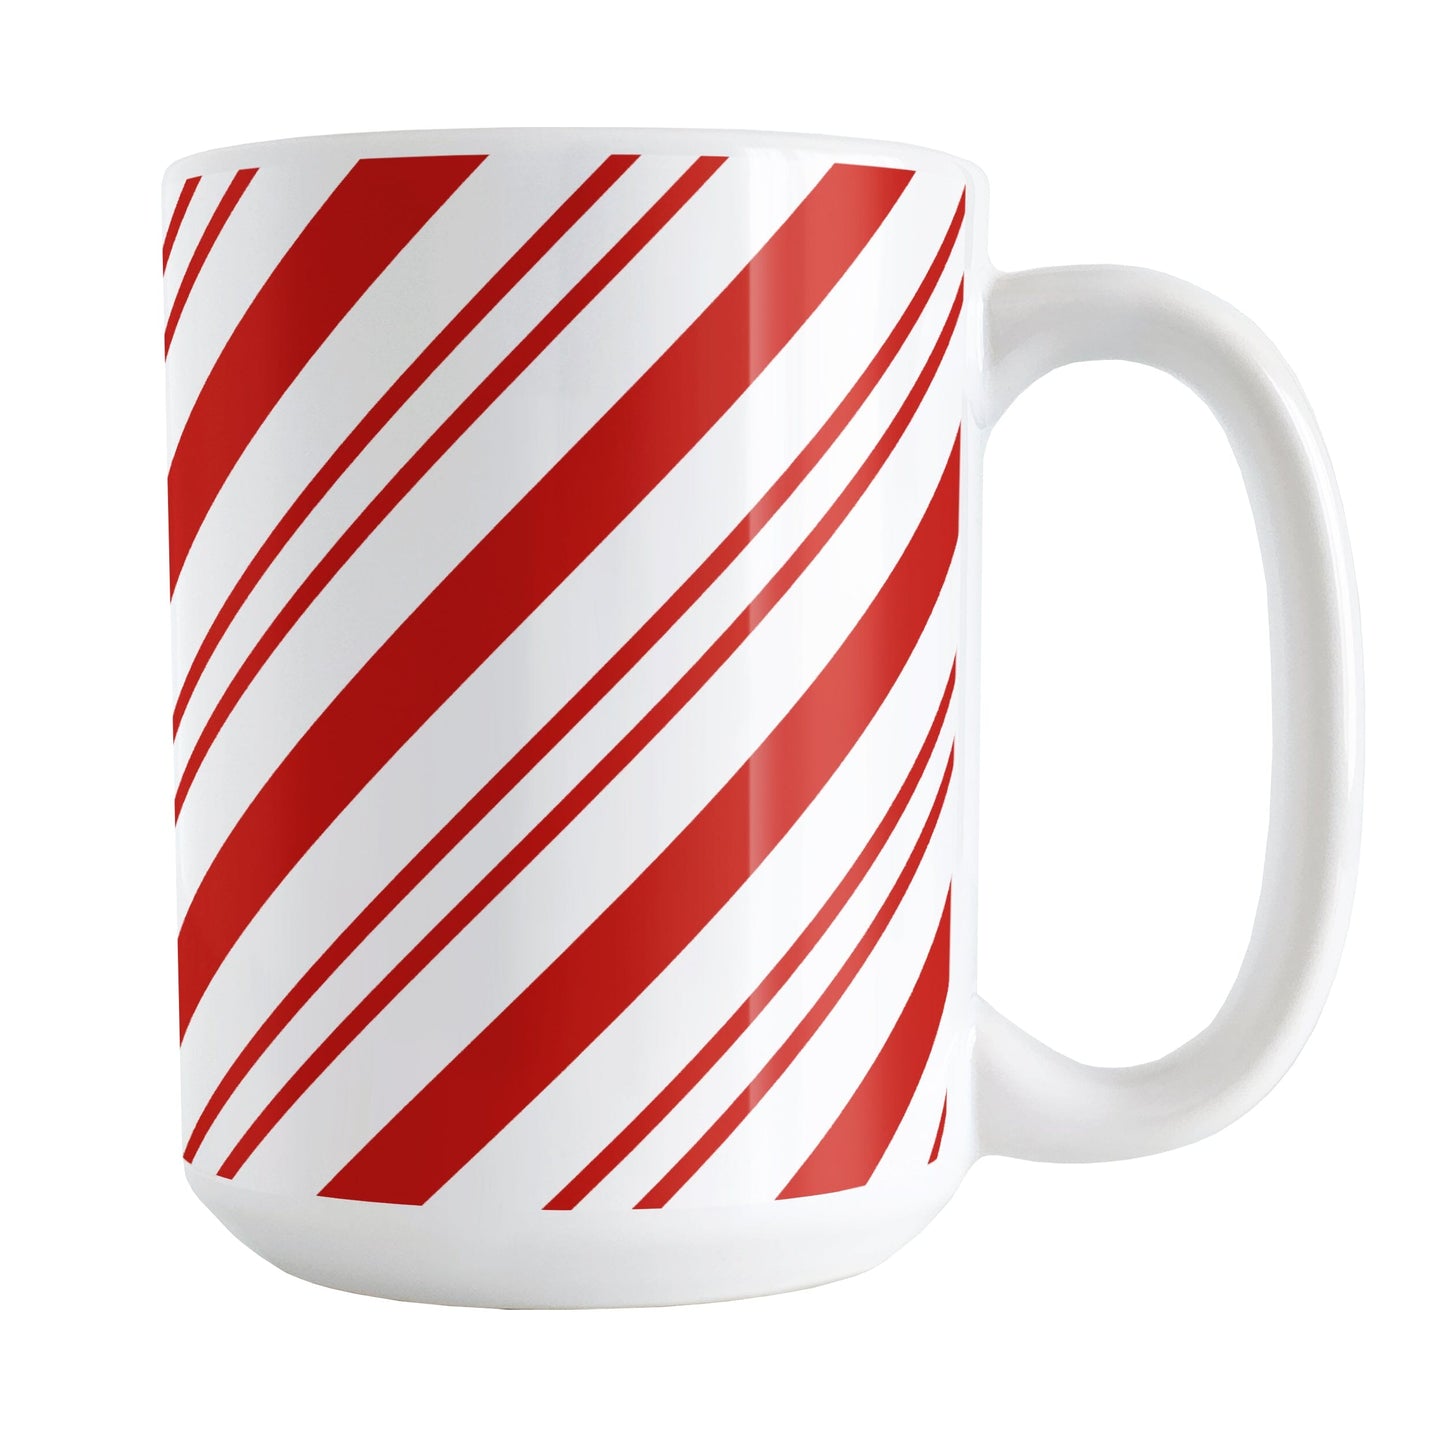 Candy Cane Stripe Mug (15oz) at Amy's Coffee Mugs. A ceramic coffee mug designed with a diagonal white and red candy cane-style stripe pattern that wraps around the mug up to the handle.